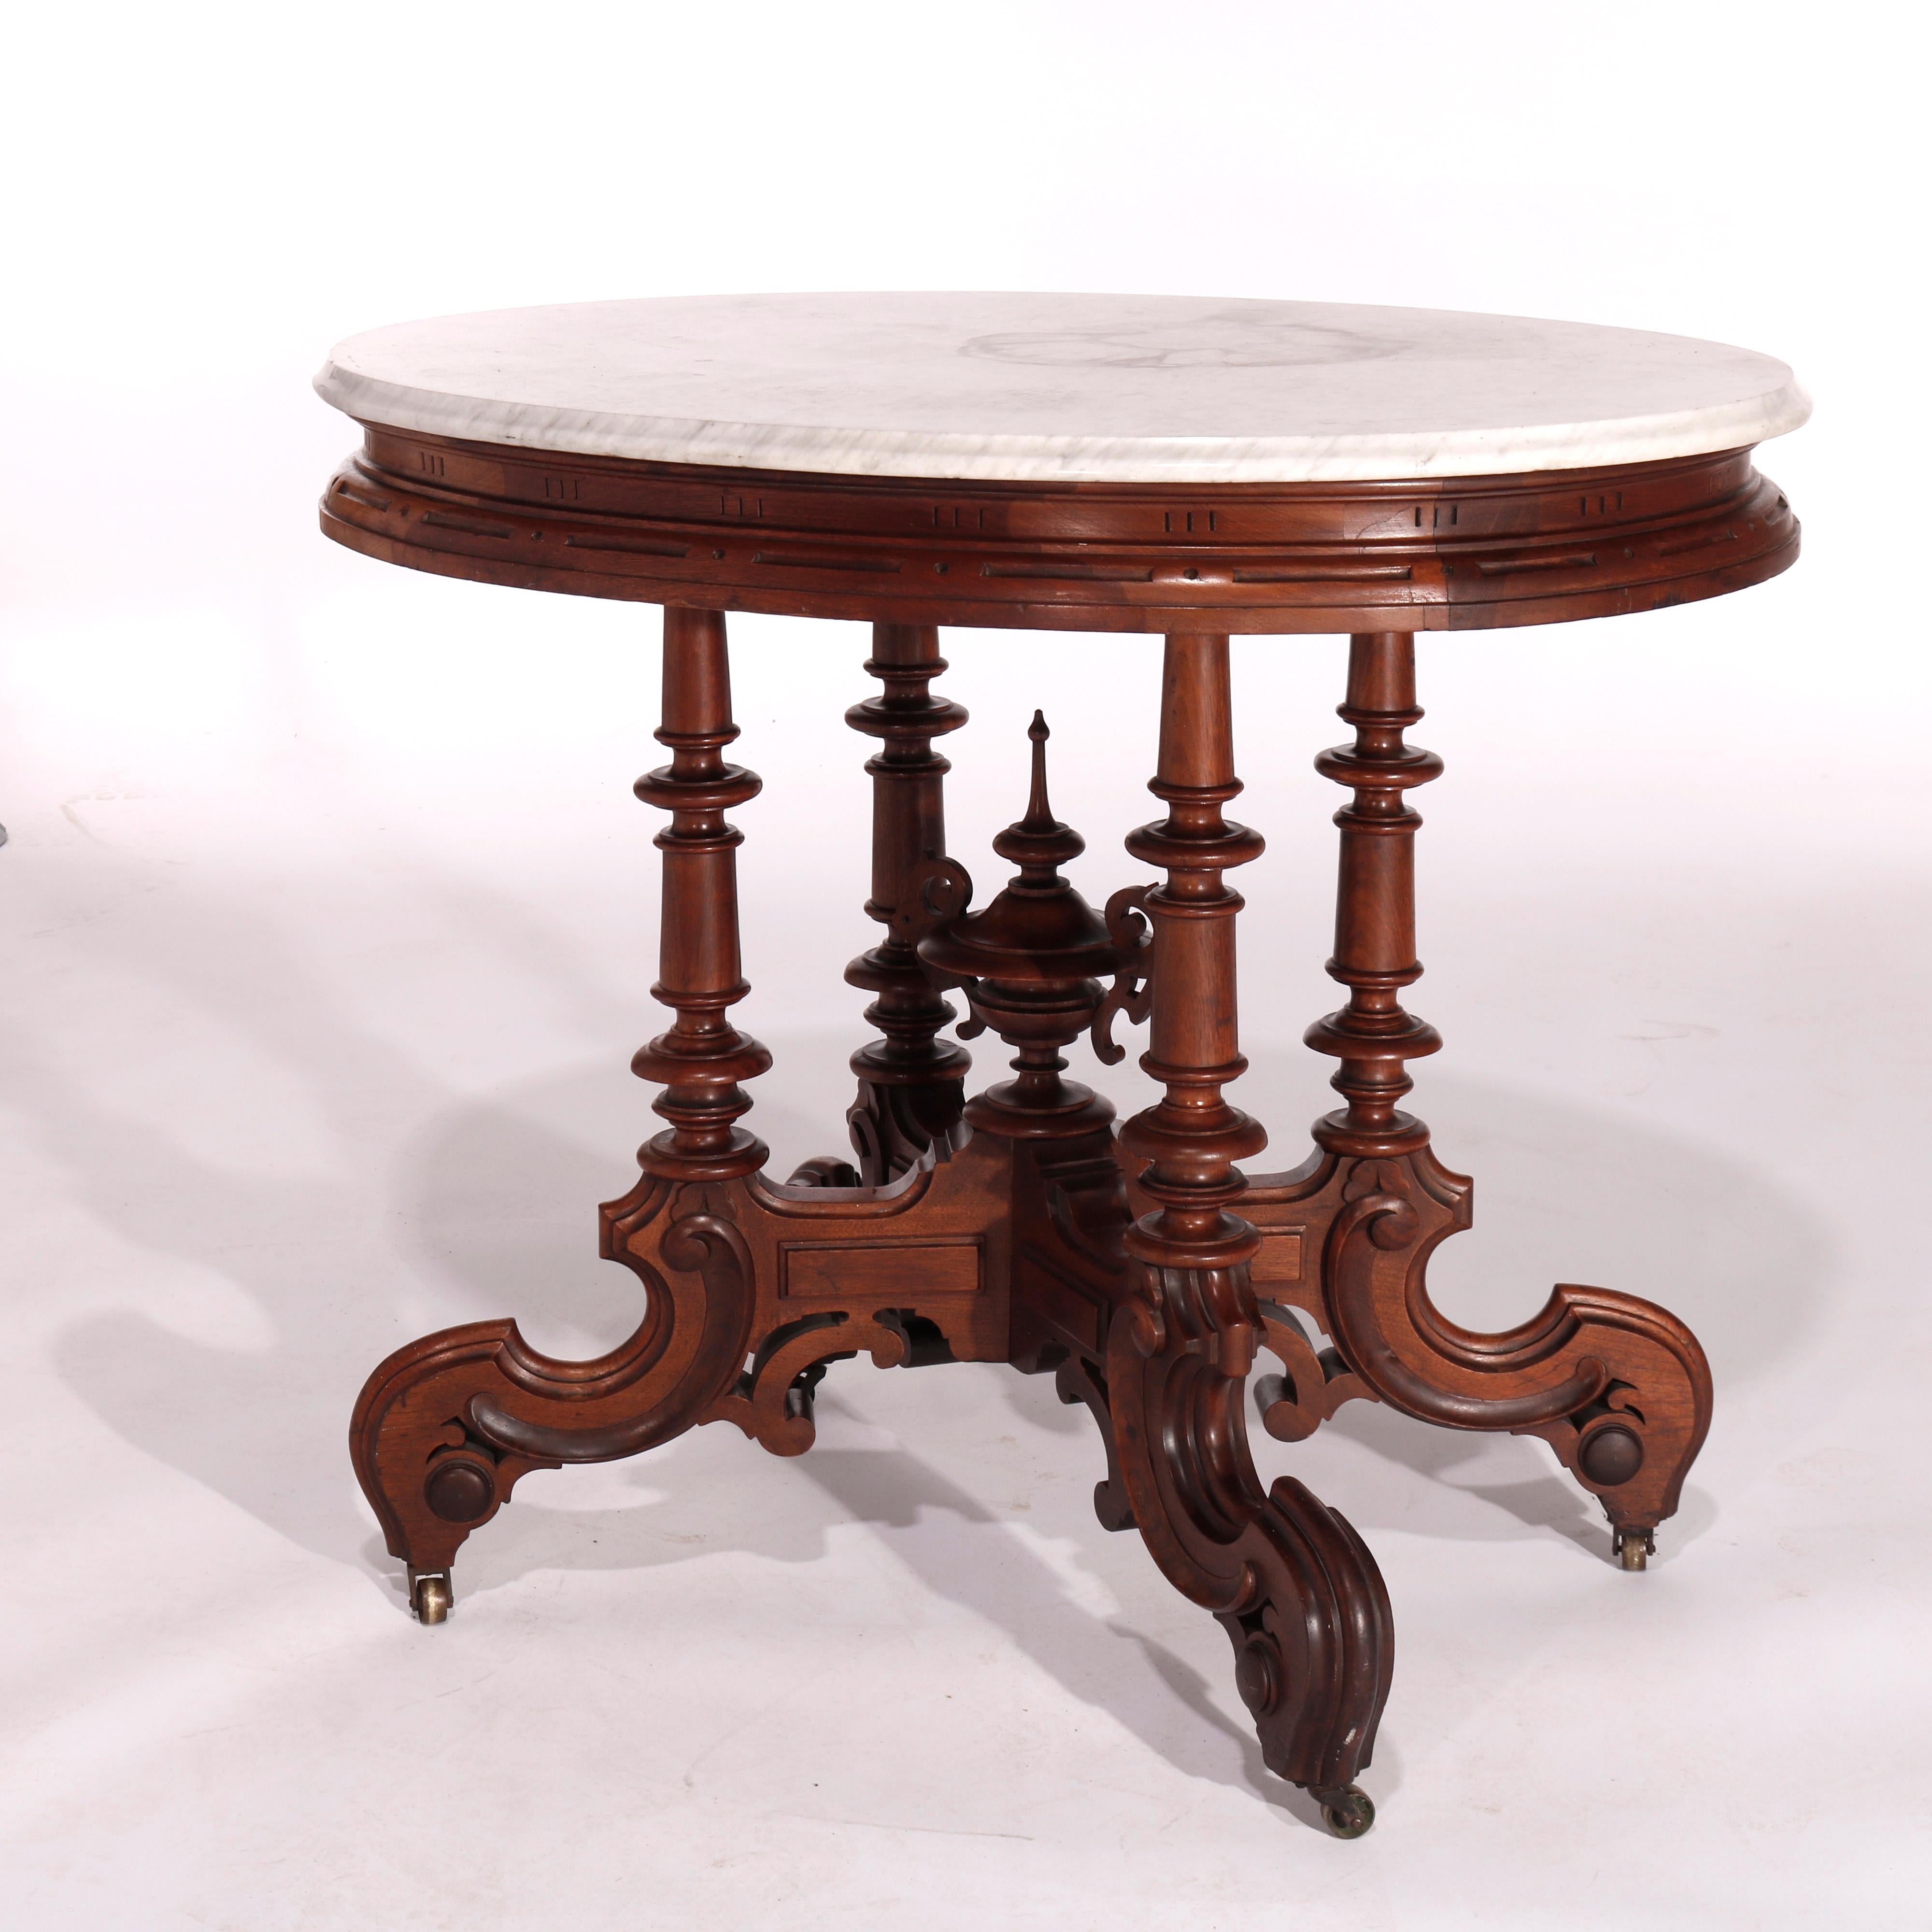 Antique Victorian Brooks Brothers Walnut & Marble Parlor Table, circa 1890 For Sale 5